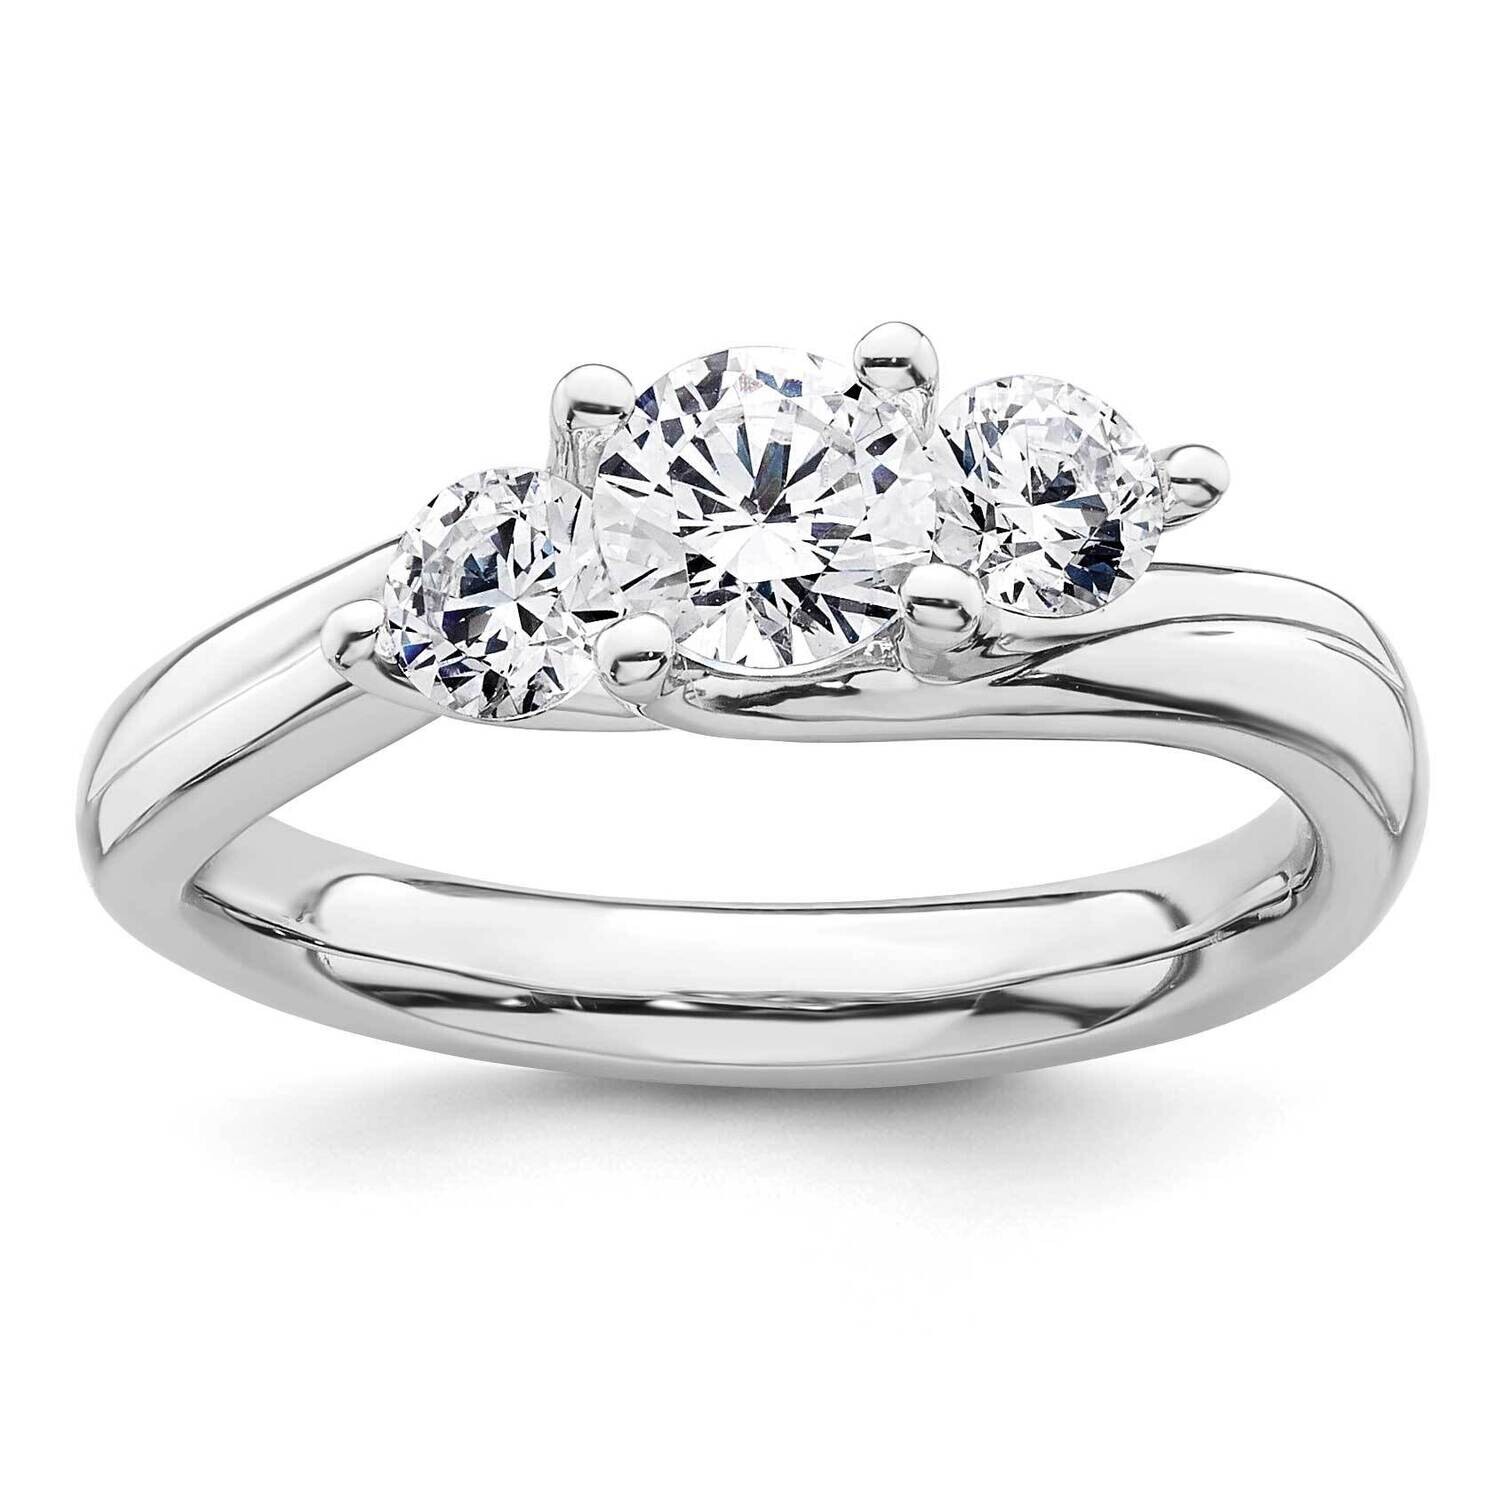 3-Stone Holds 1/2 Carat 5.2mm Round Center 2-4.1mm Round Sides Engagement Ring Mounting 14k White Gold RM2963E-050-WAA